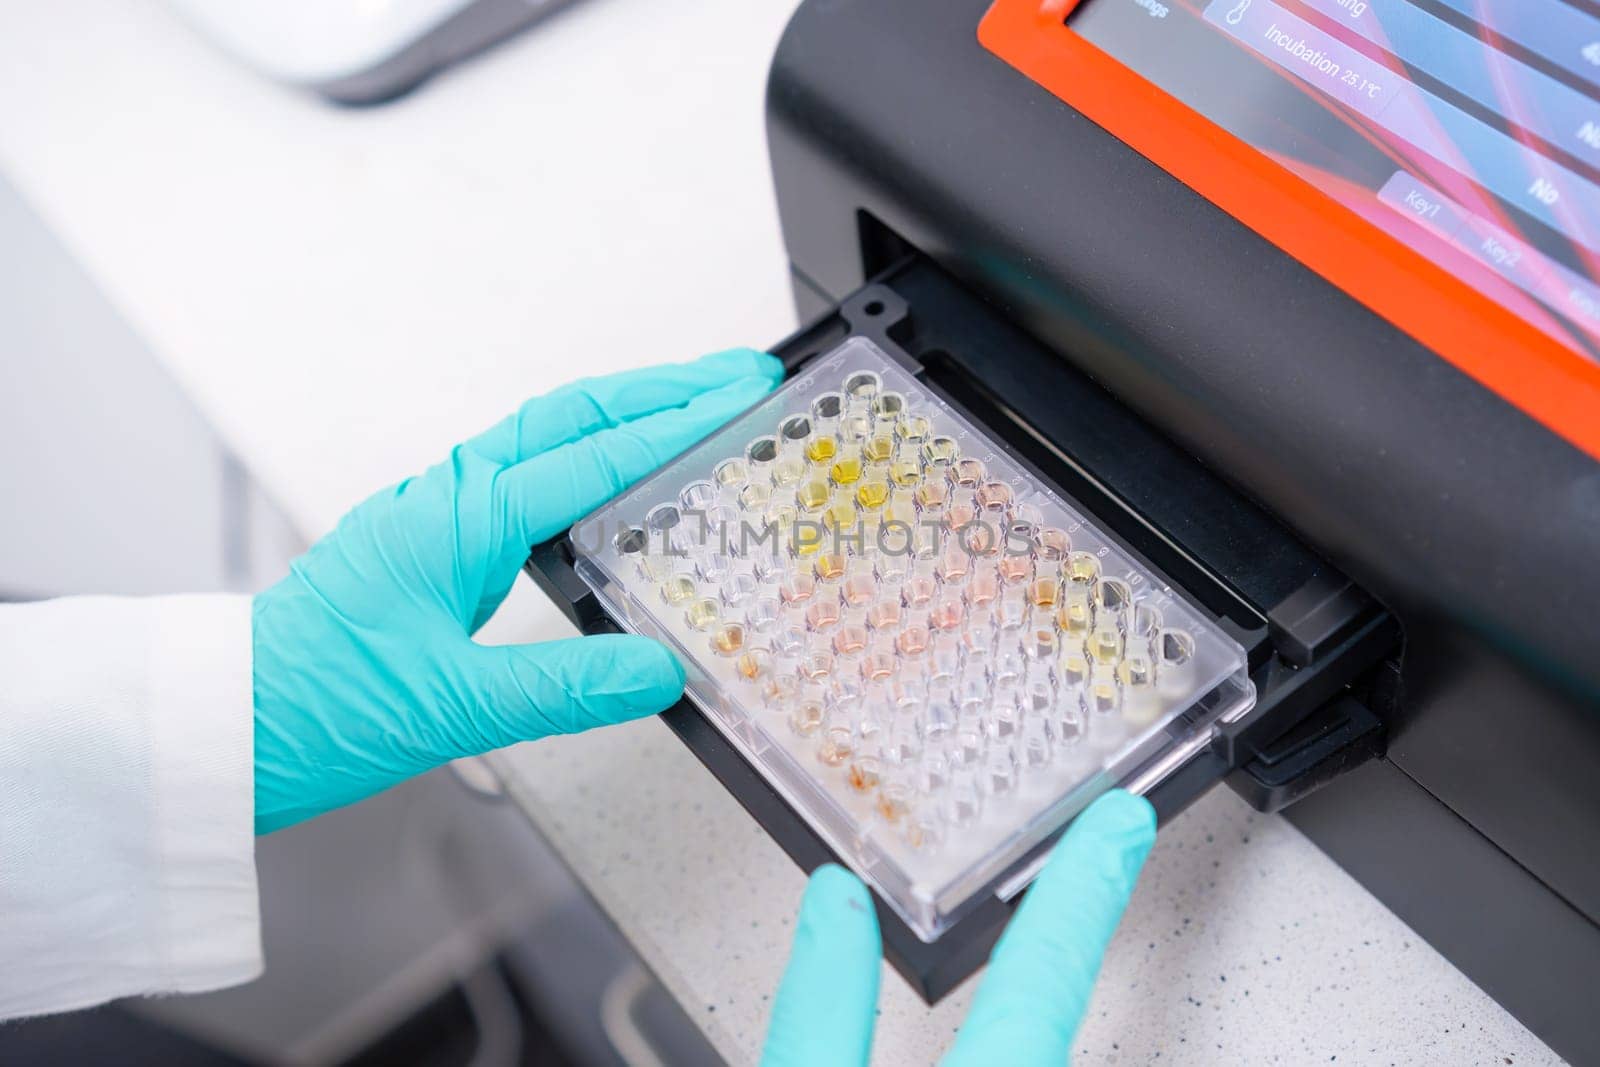 A microplate spectrophotometer is used by scientist to analyze DNA samples by inserting microplate. by vladimka